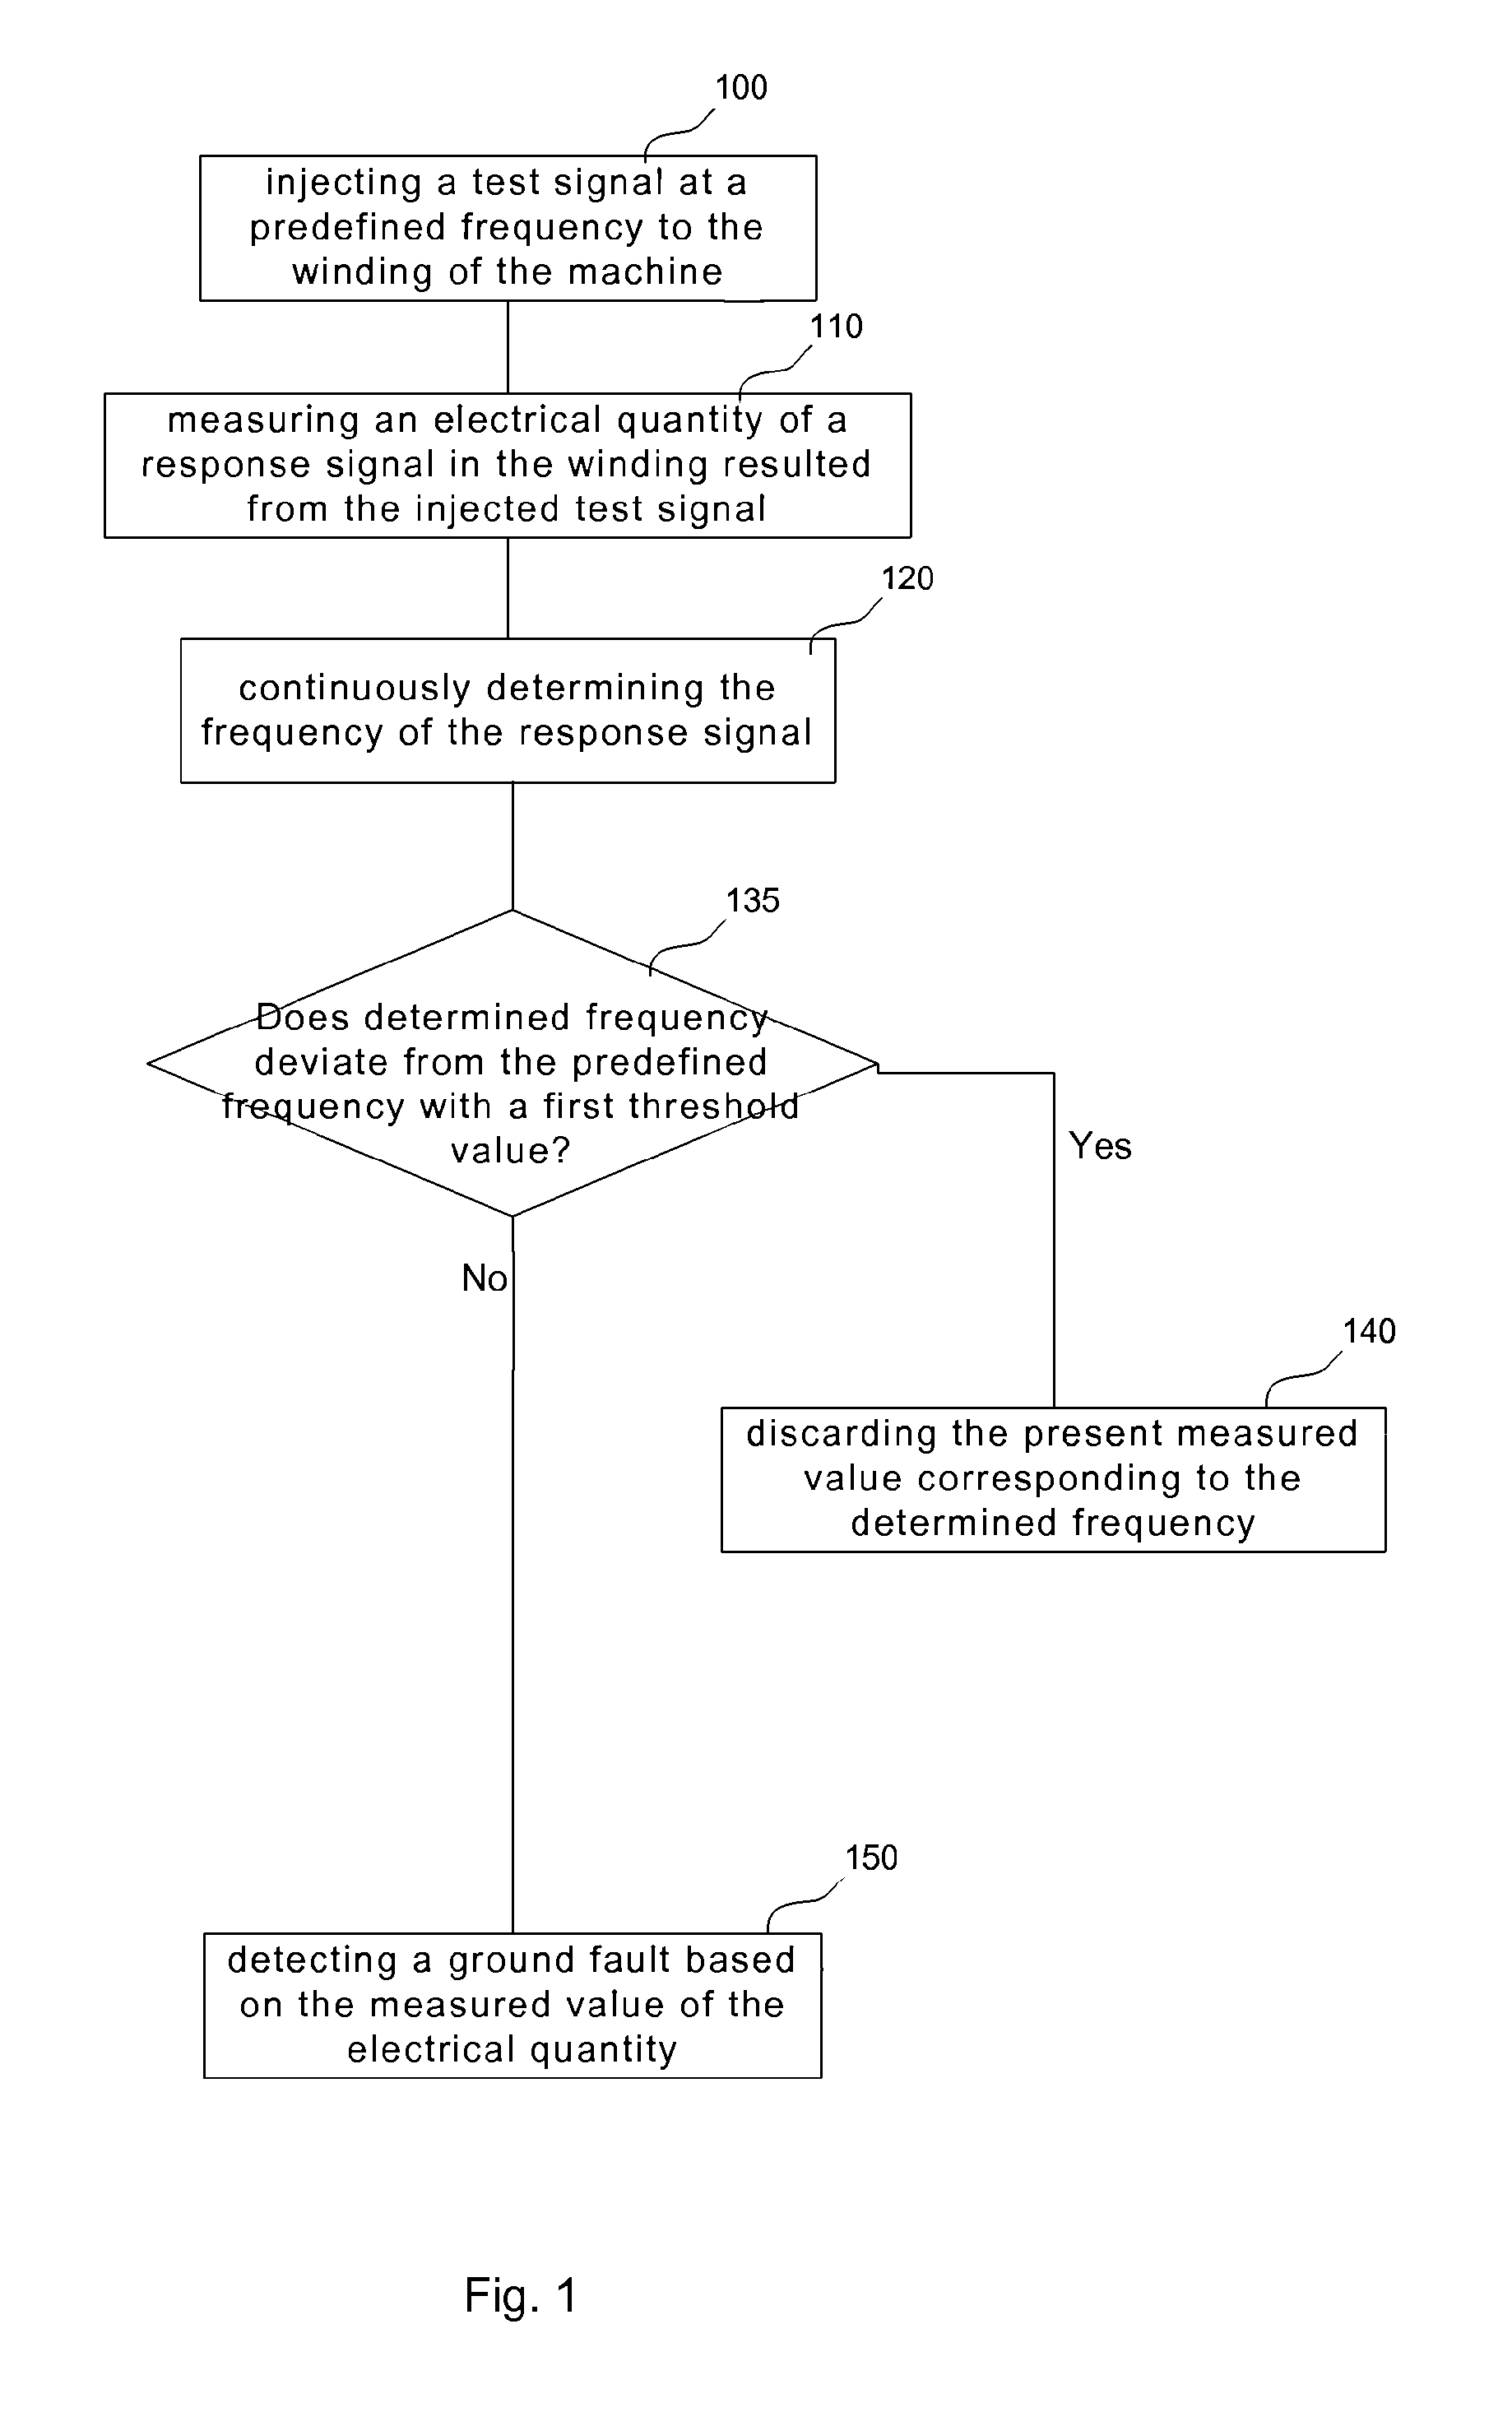 Method And Device For Enhancing The Reliability Of Generator Ground Fault Detection On A Rotating Electrical Machine